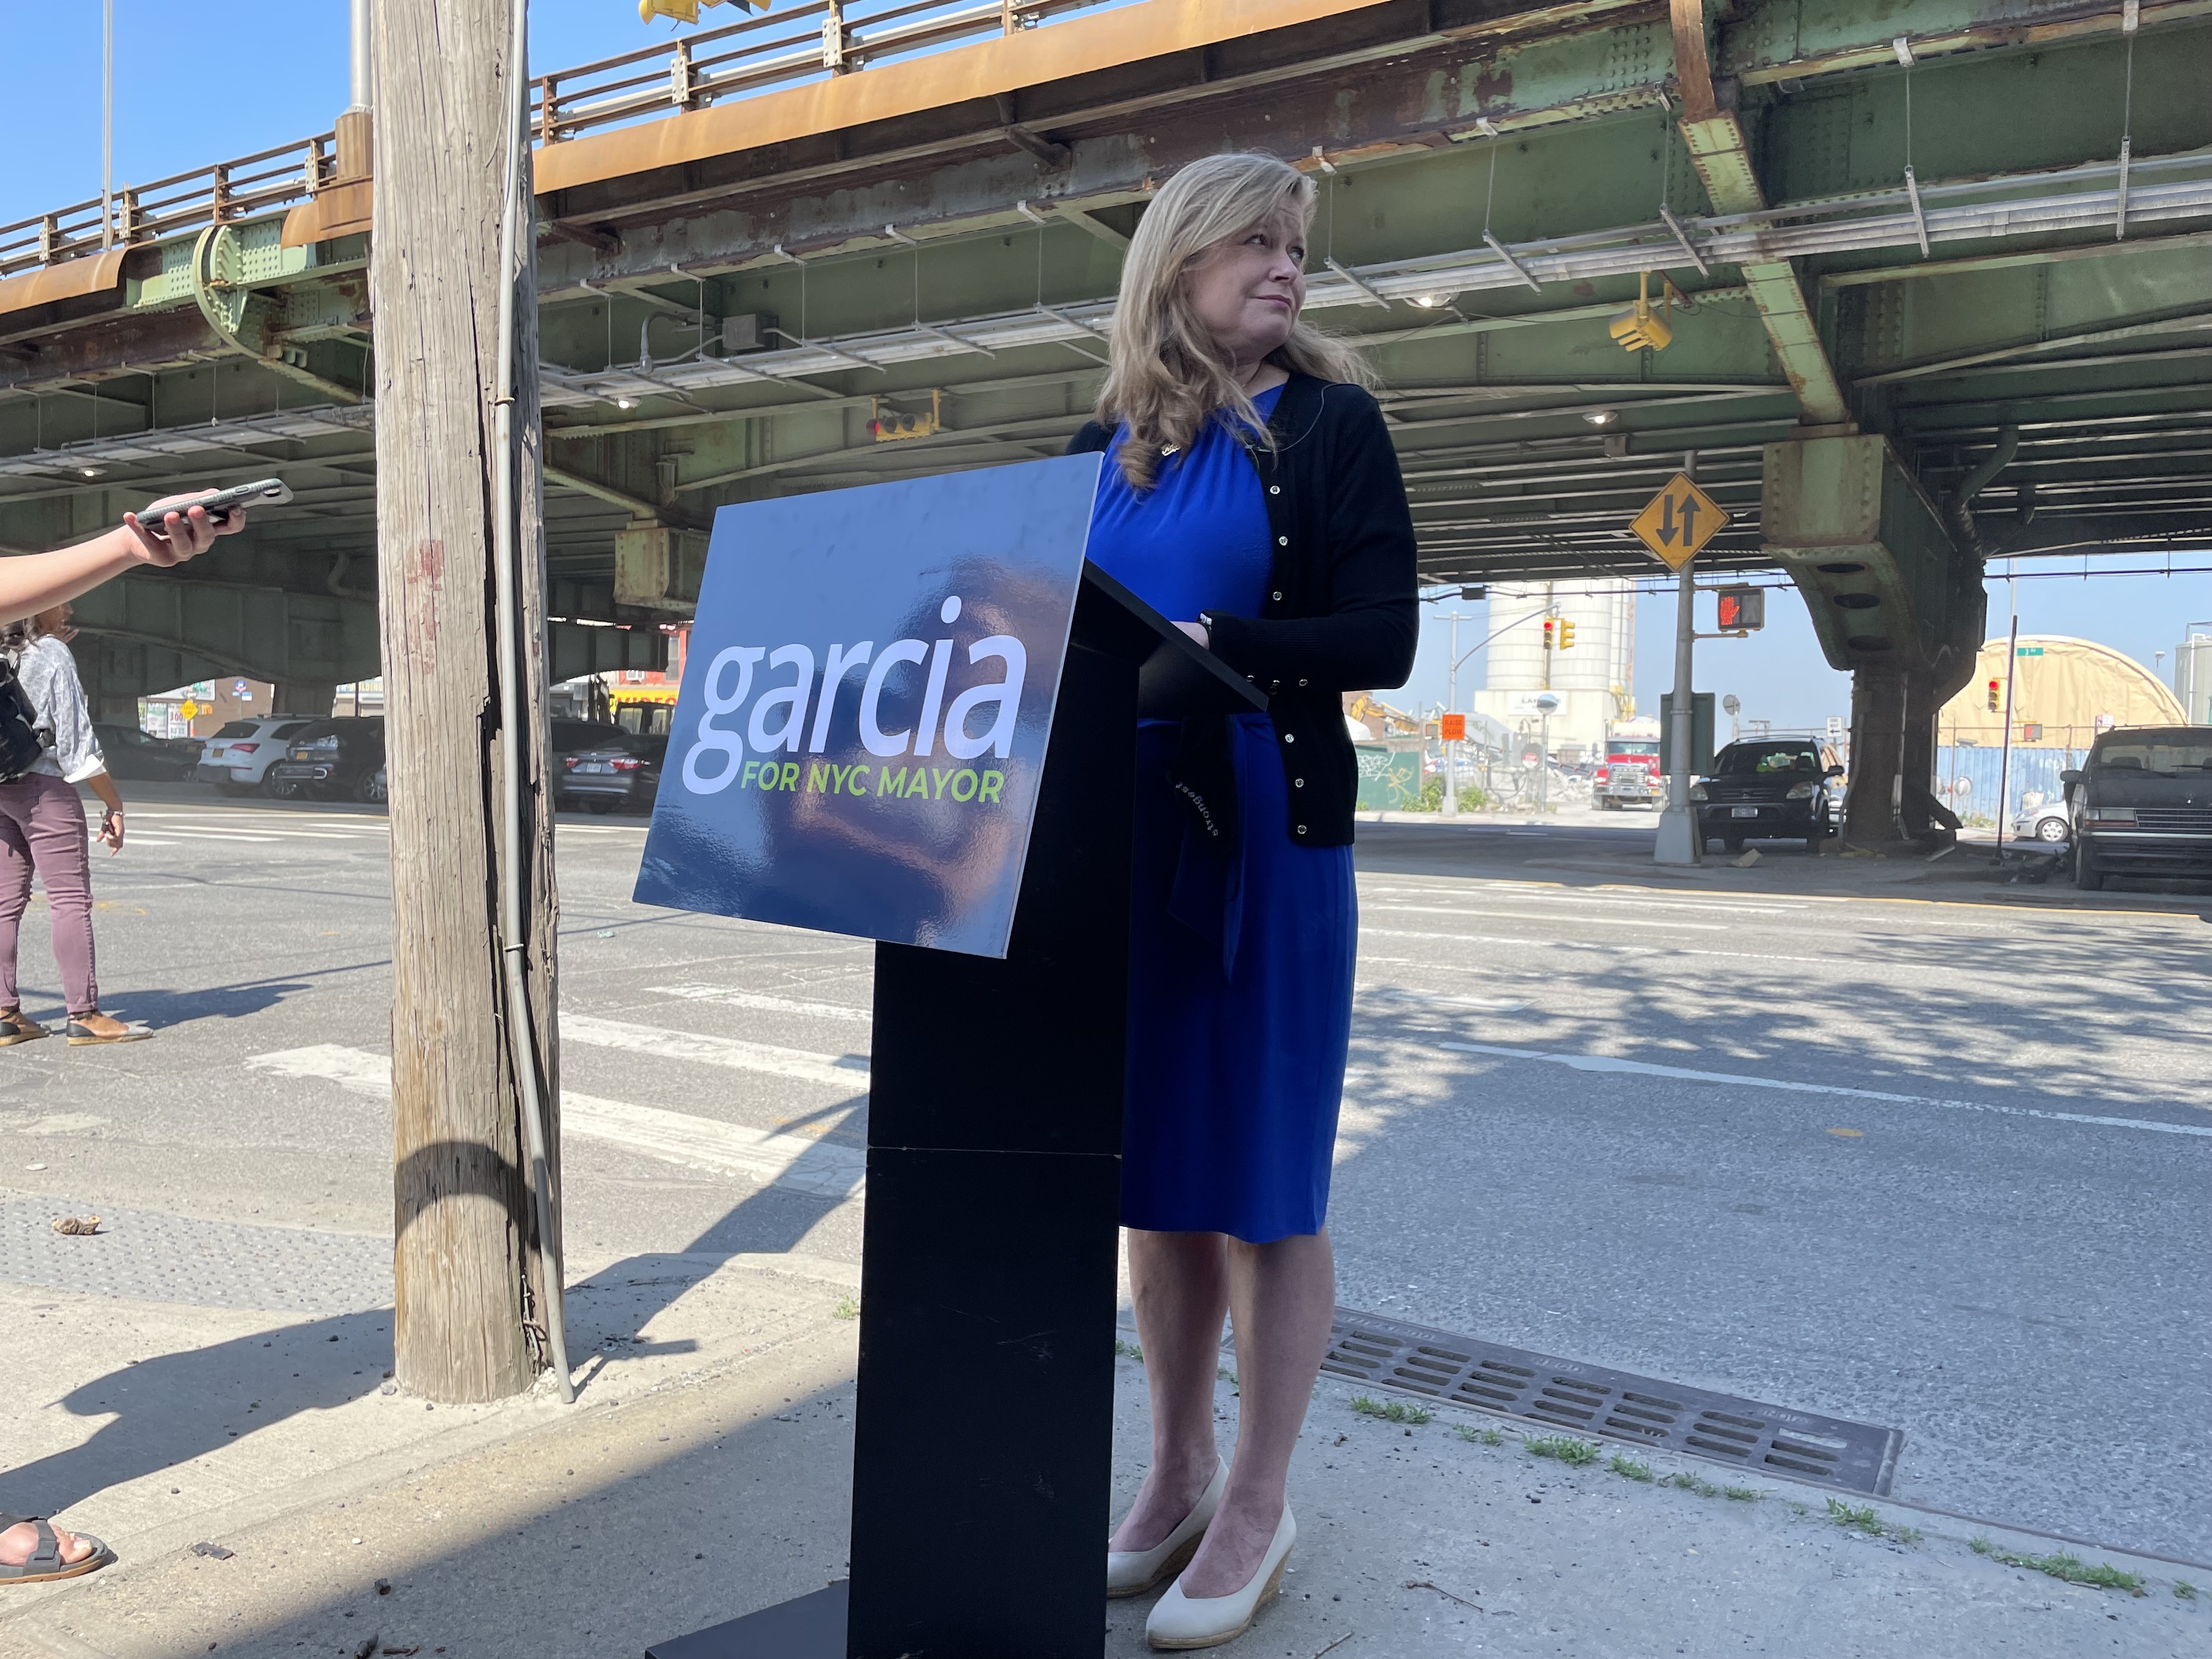 During a press conference in Gowanus, Garcia presented details of her transit plan.